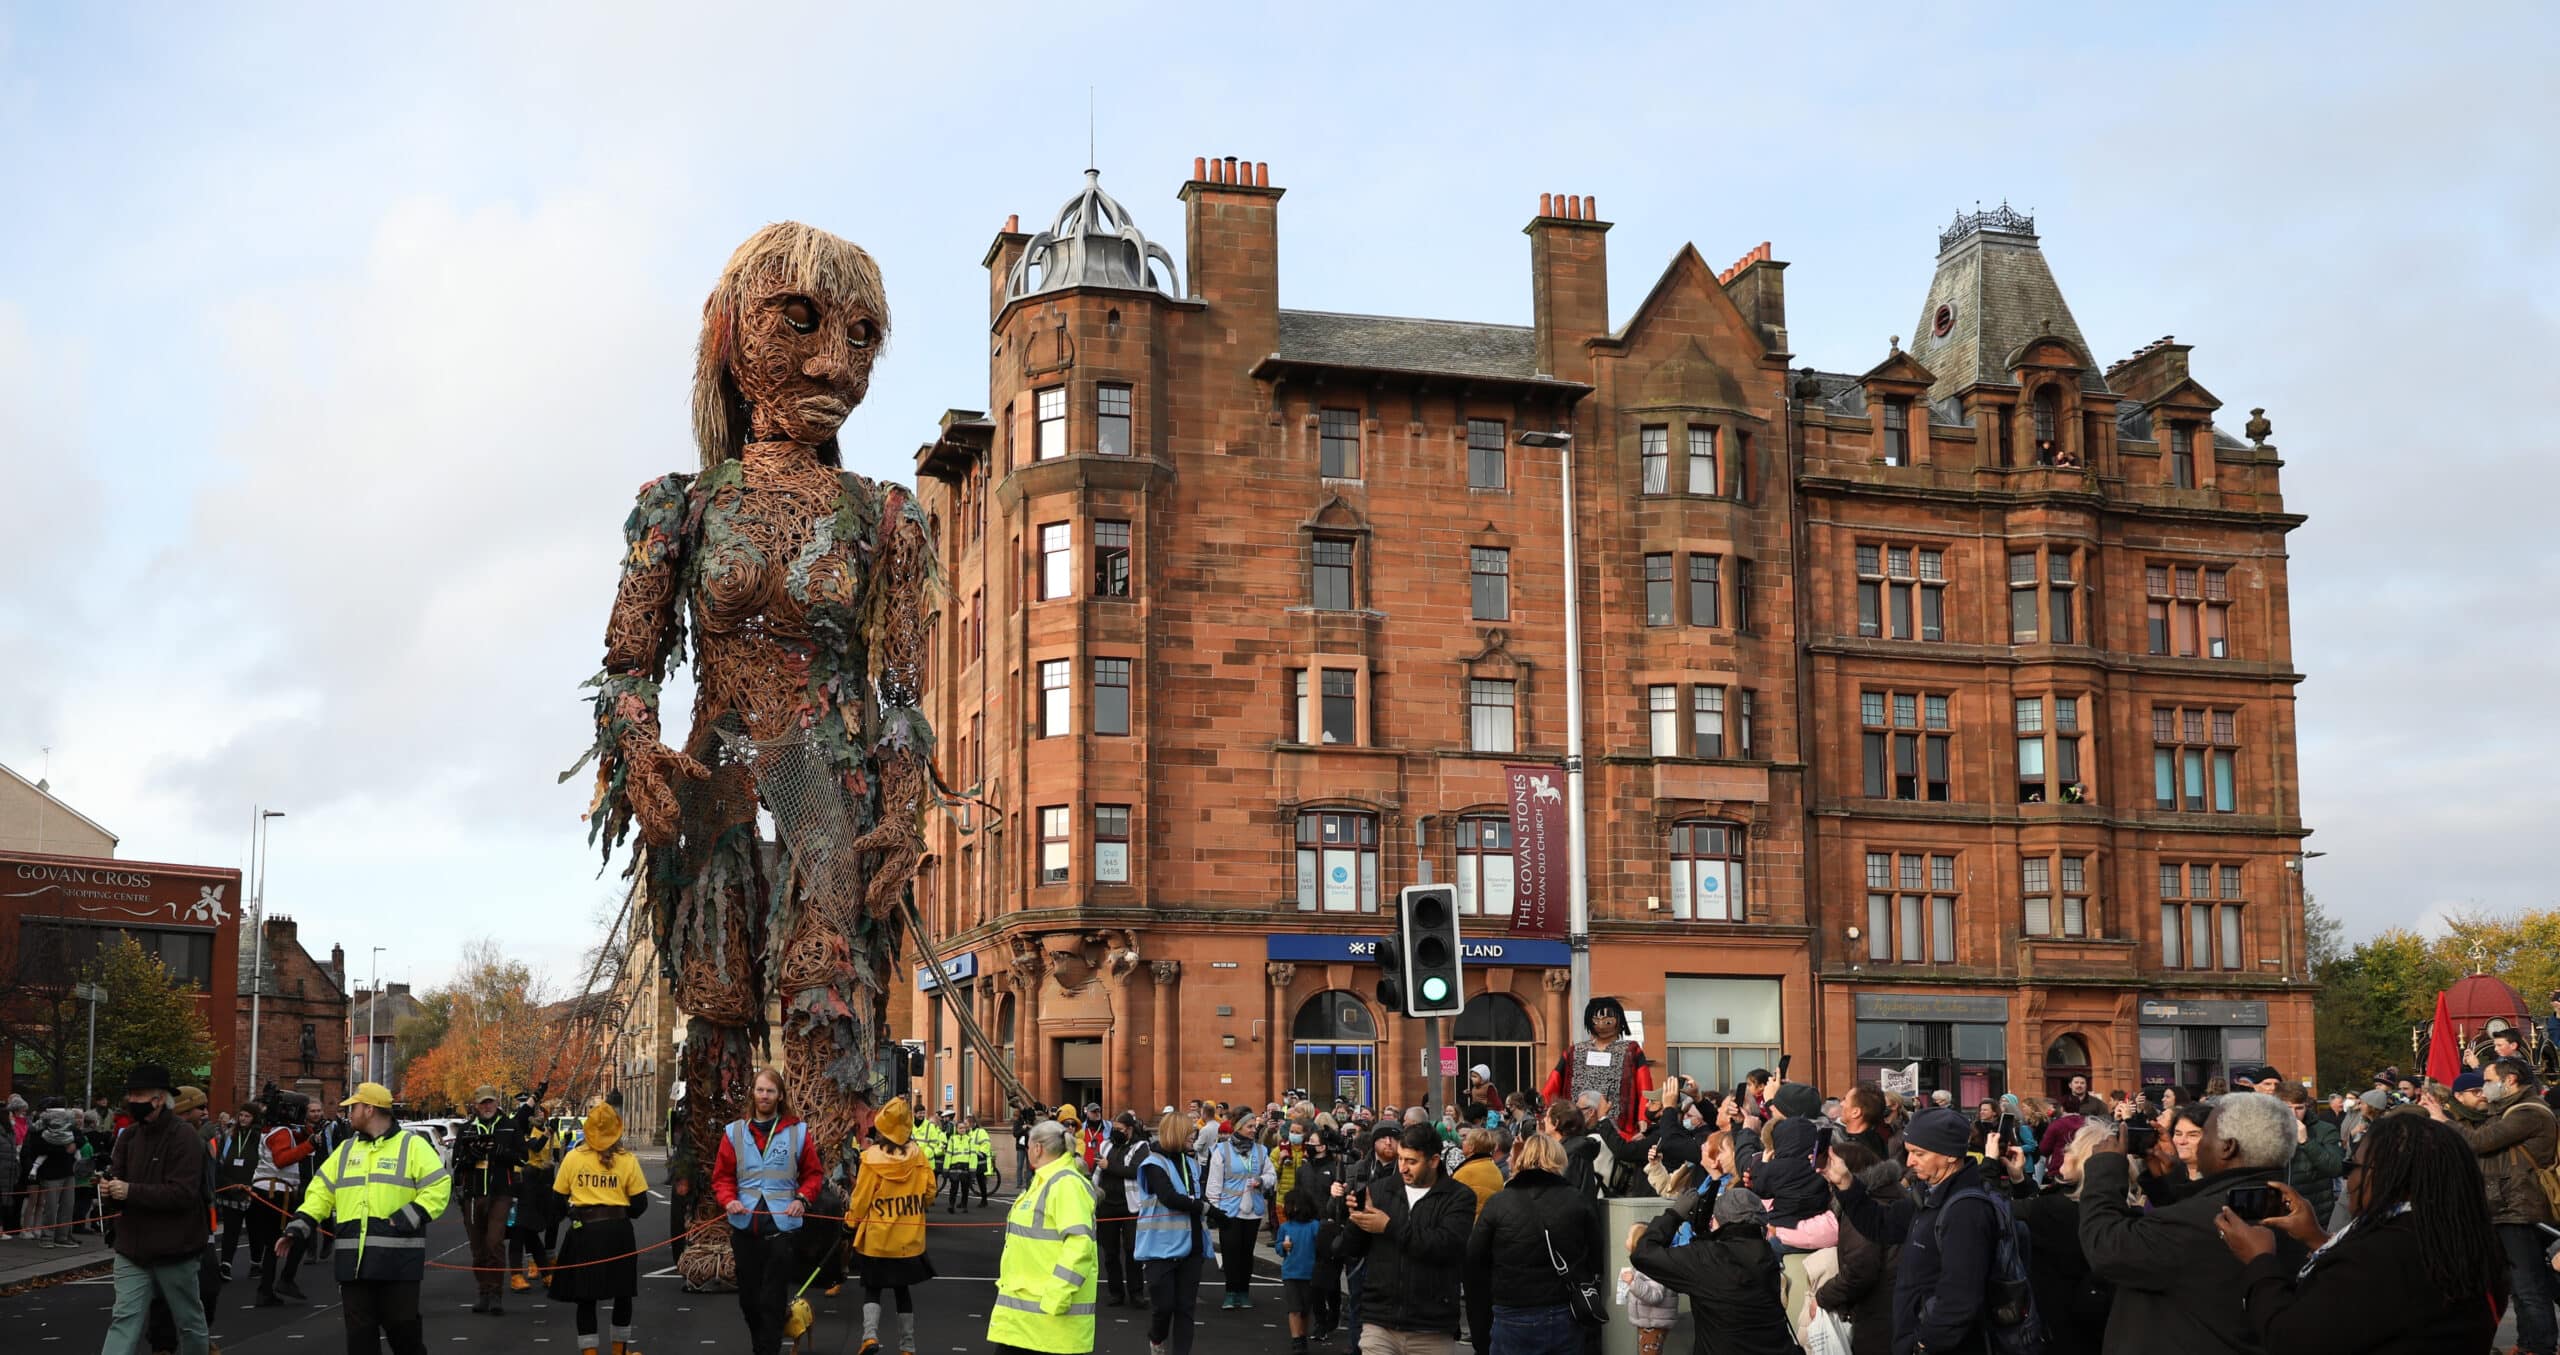 A giant puppet of a sea goddess made entirely of recycled materials walked through Glasgow during the COP26 climate change summit.